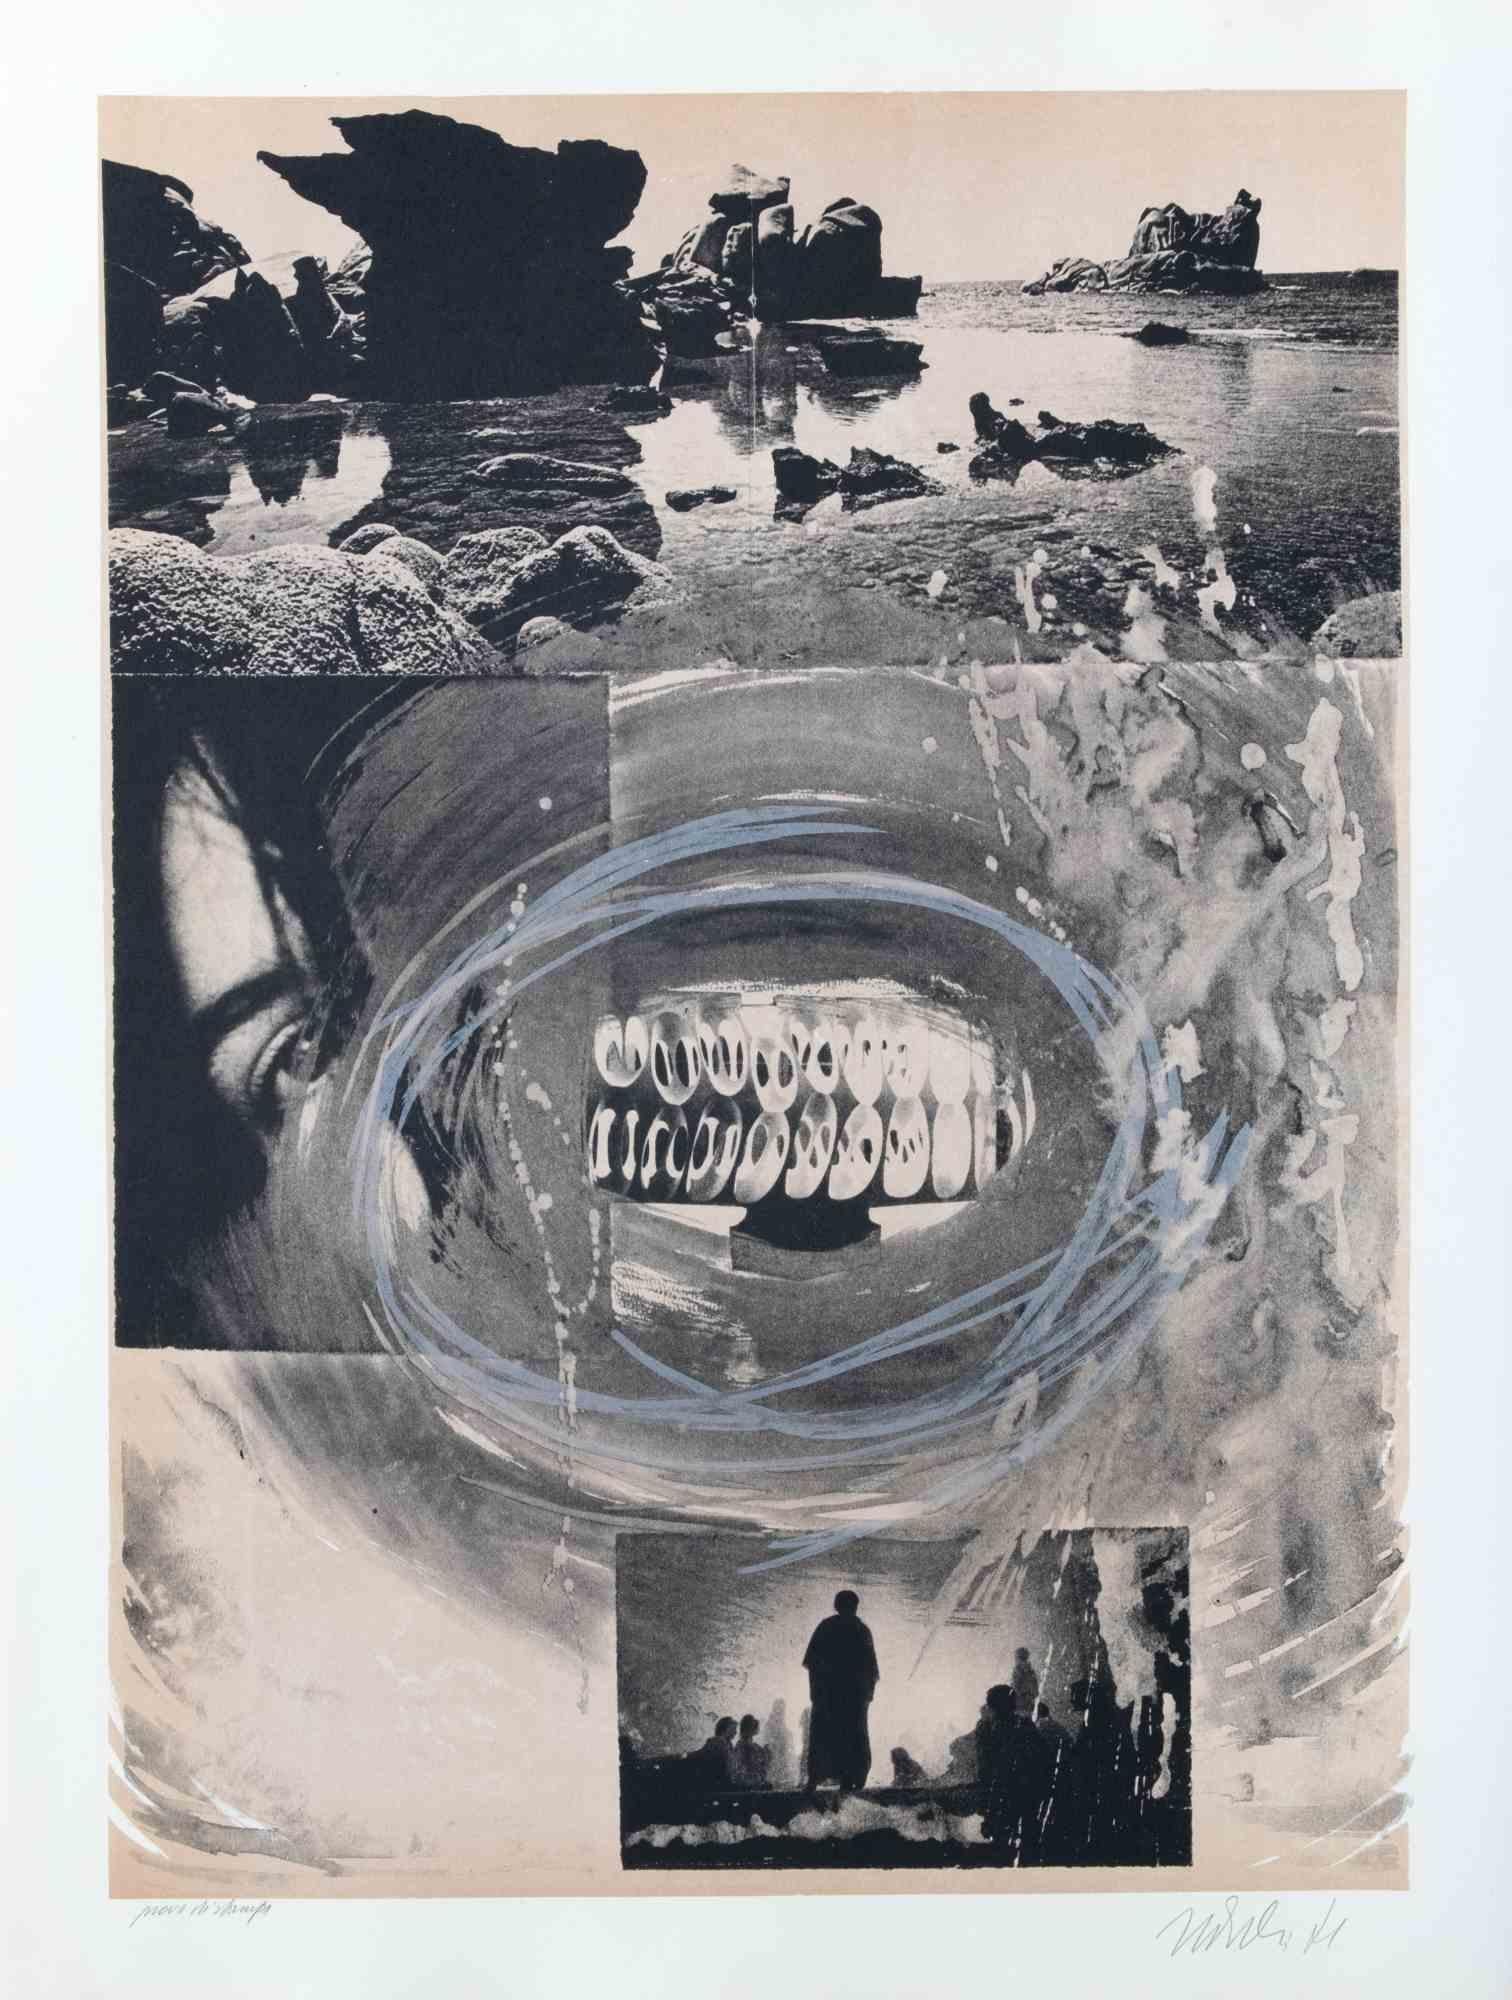 The Mouth of the Time is a contemporary artwork realized by Nani Tedeschi in 1971.

Black and white lithograph.

Hand signed and dated on the lower margin.

Artist's proof